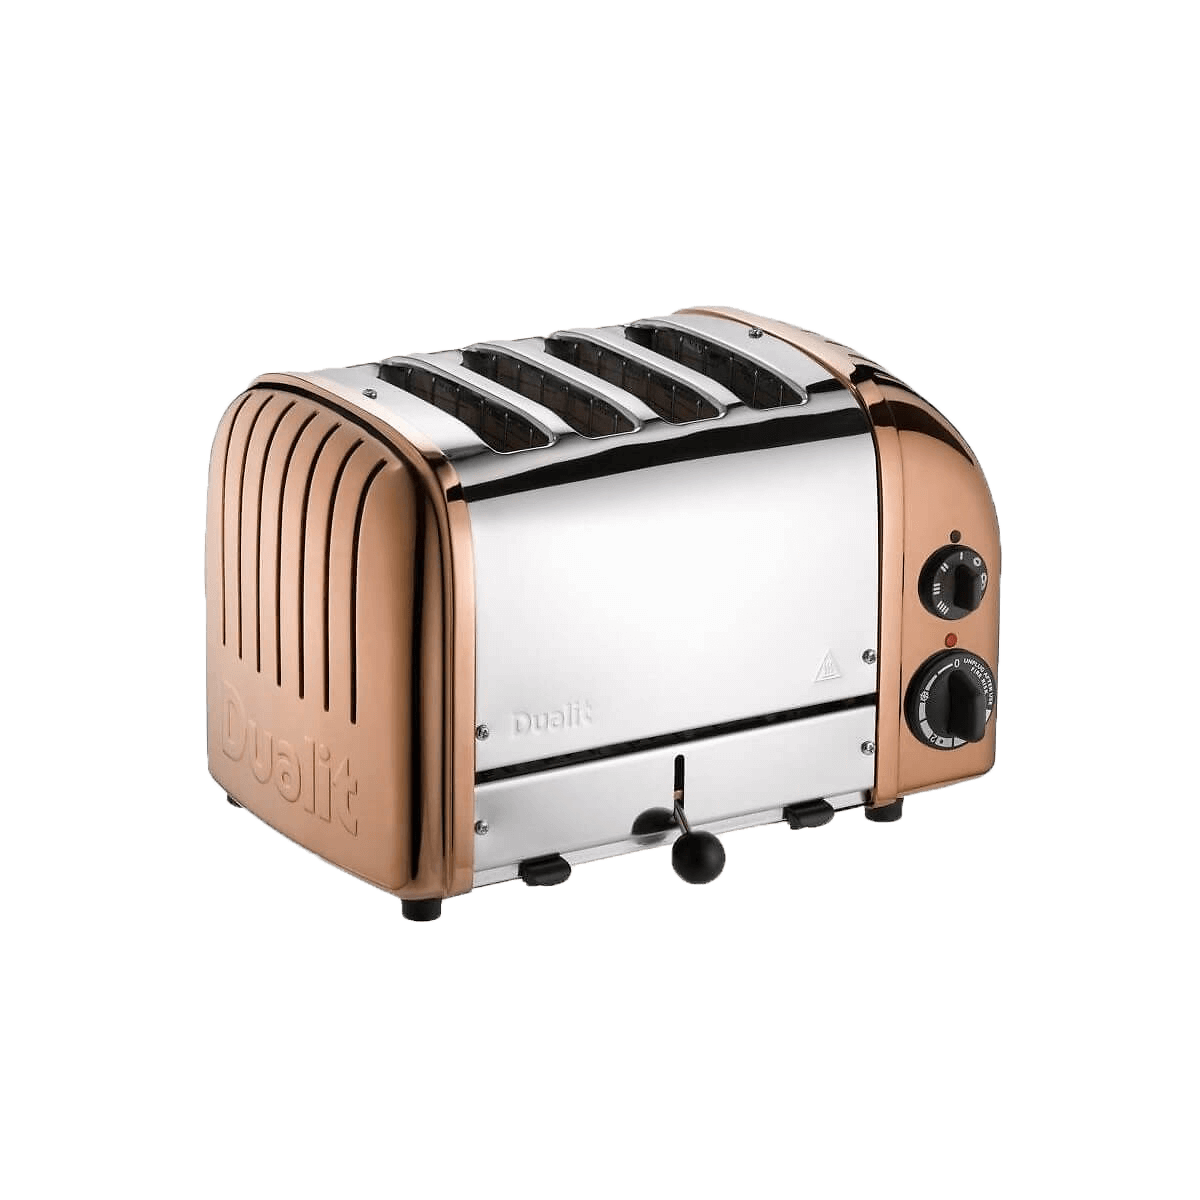 CLASSIC TOASTER 4SLOT COPPER Gold Dualit